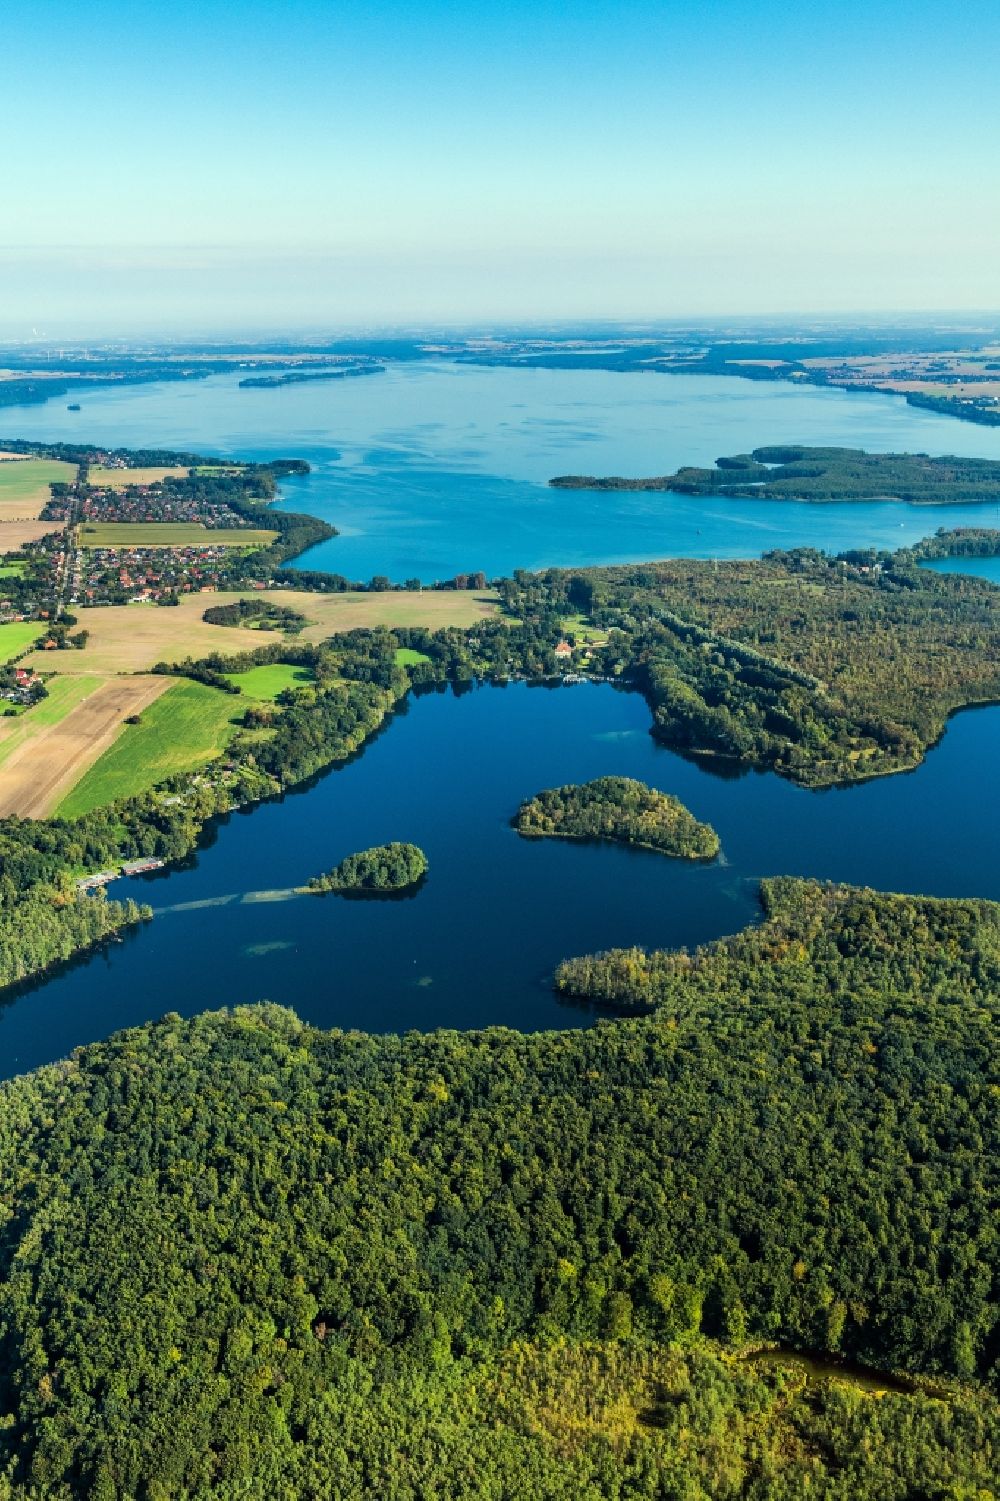 Aerial image Schwerin - The lake Ziegelsee in the urban area of Schwerin in the state of Mecklenburg-Vorpommern. The lake is part of the EU bird protection area Schweriner Seen and is partly listed as a nature park and protected area. It is used for boating, shipping and watersports. Next to it is the bigger Schweriner Aussensee (Outer Lake)